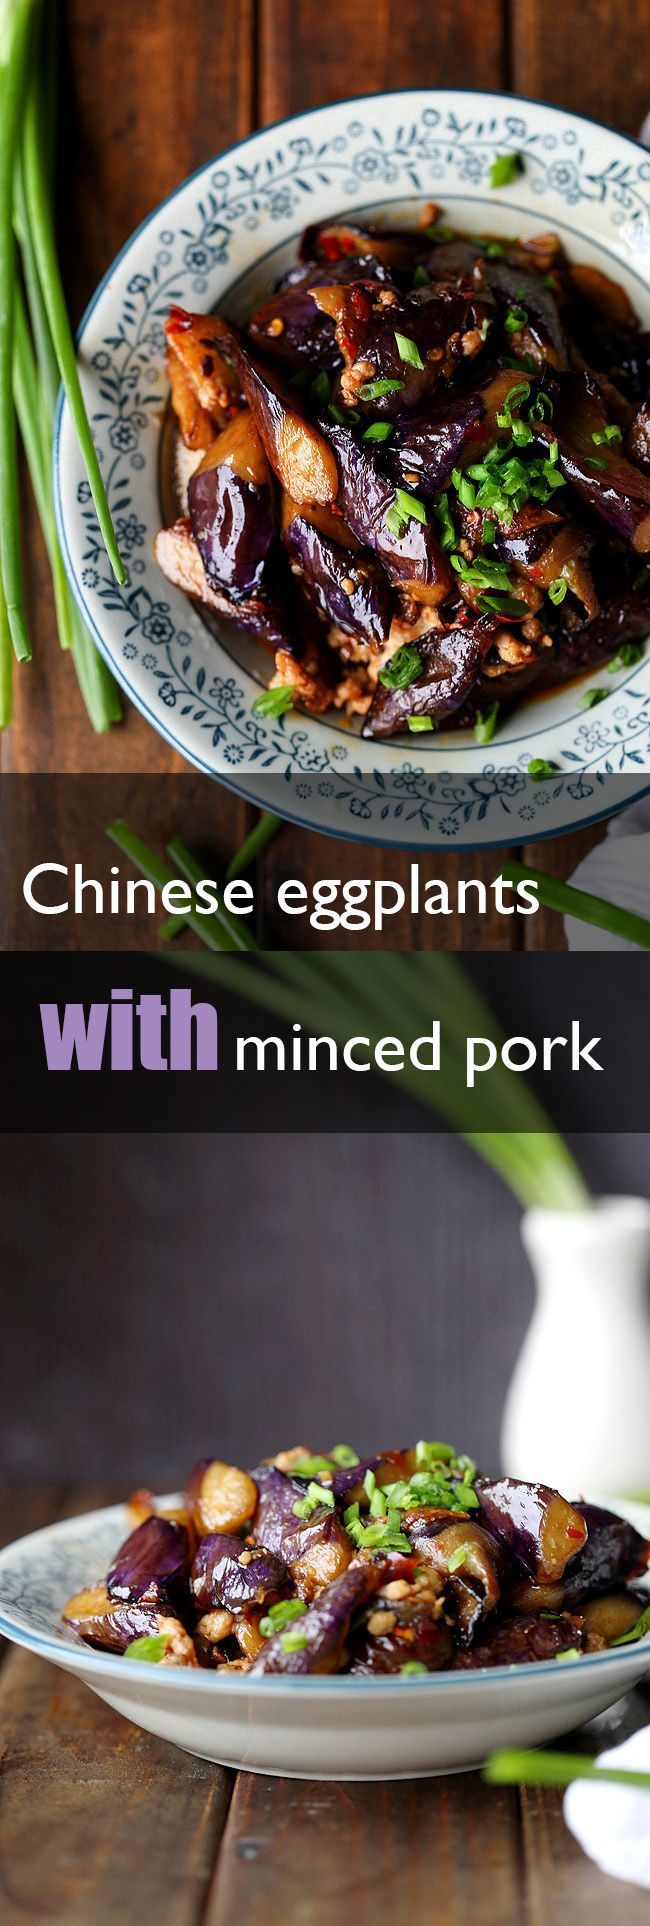 Chinese #eggplant with minced pork–a savory and popular Chinese eggplant recipe